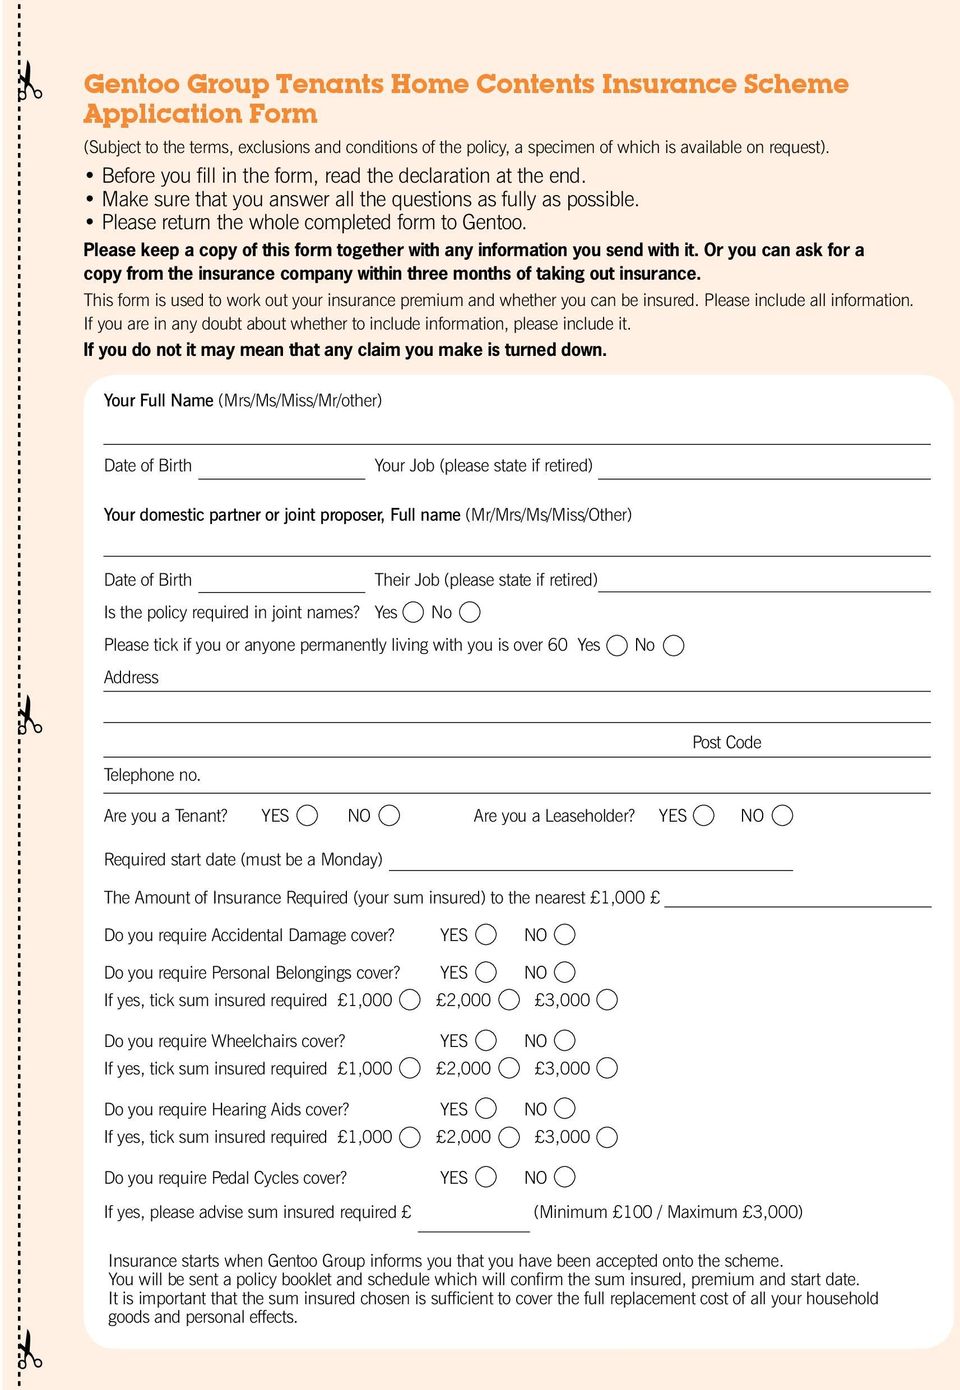 Please keep a copy of this form together with any information you send with it. Or you can ask for a copy from the insurance company within three months of taking out insurance.